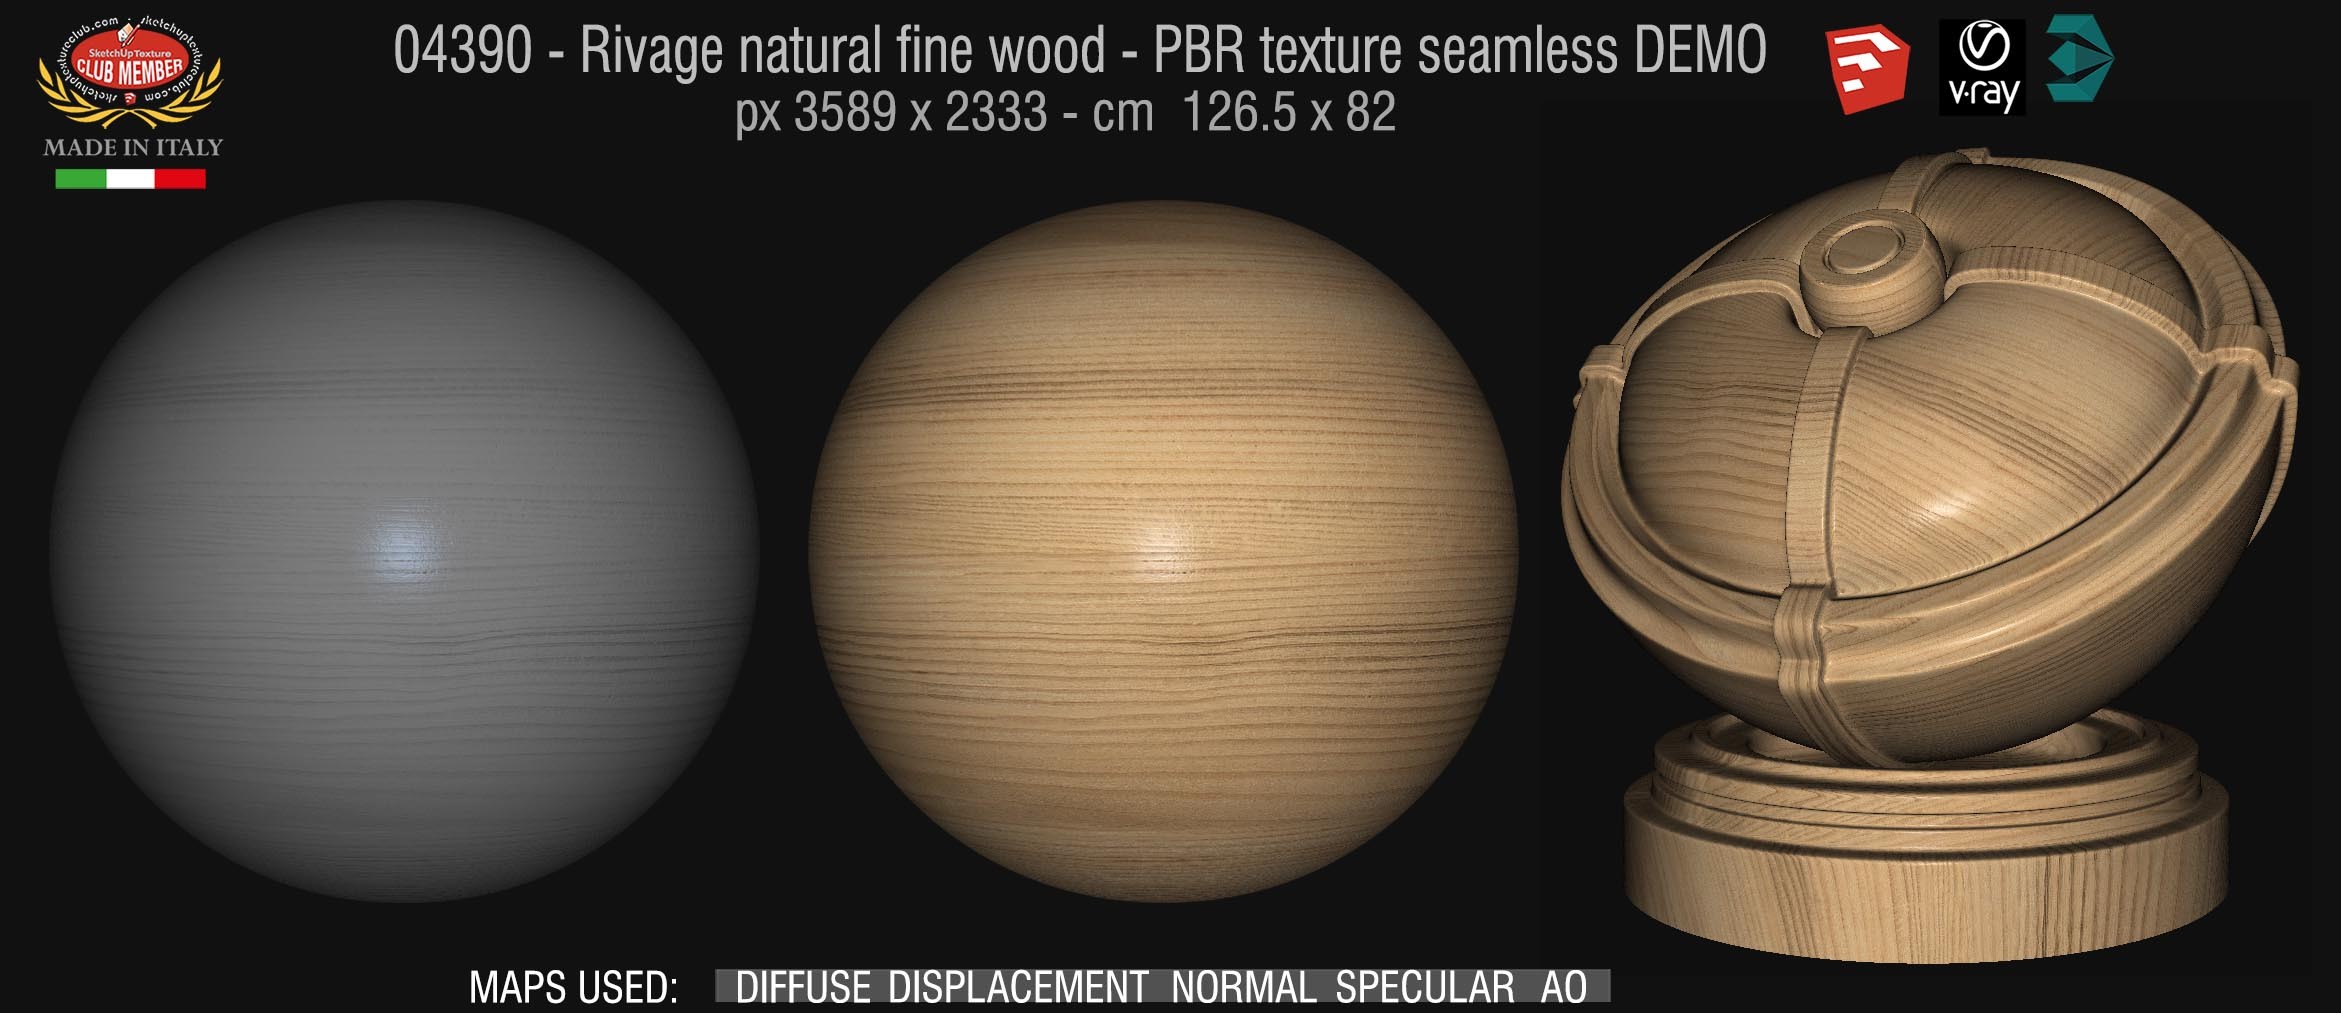 04390 Rivage natural fine wood - PBR texture seamless DEMO